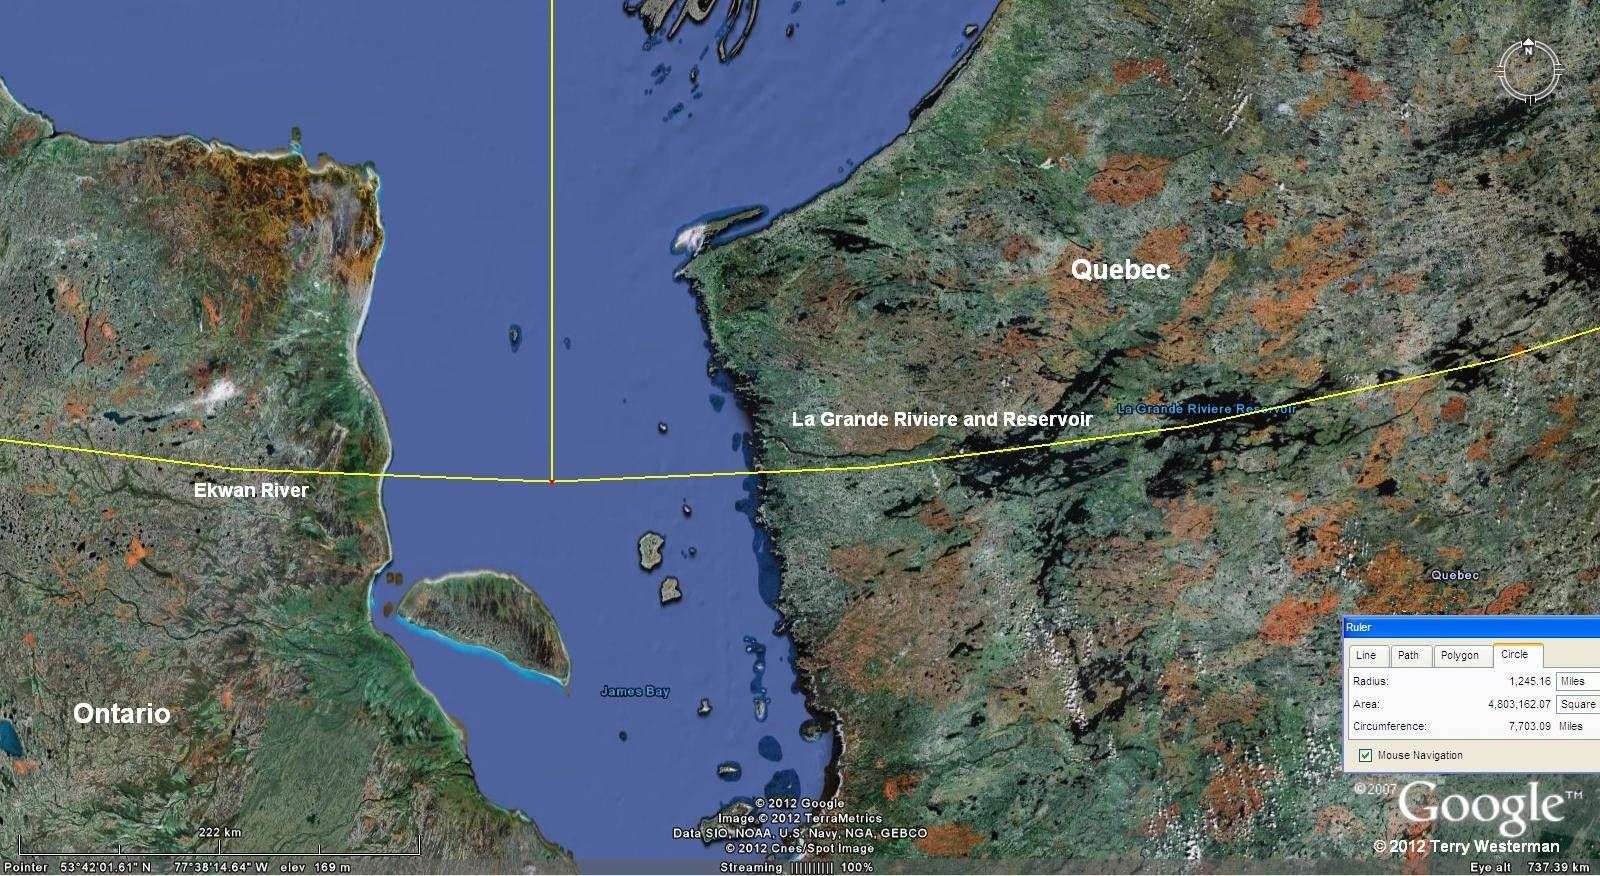 La Grande Riviere and Reservoir, Quebec, Canada formed by the southern part of the Baffin Island 1245 mile radius seismic circle